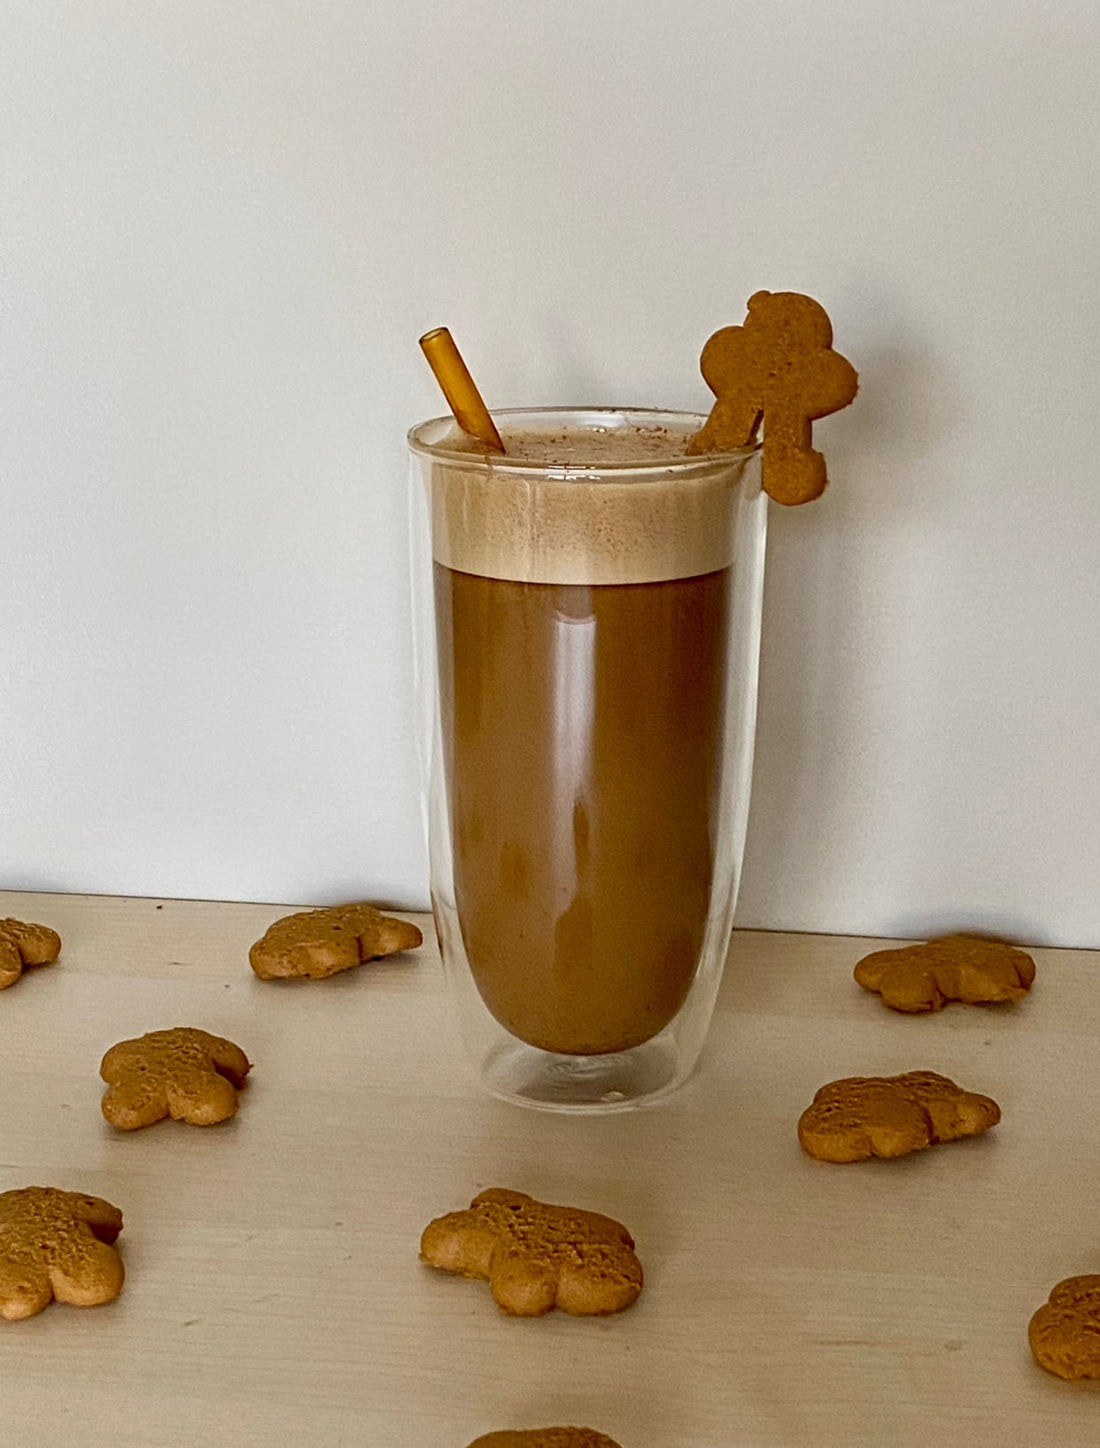 a tall glass tumblr mug is filled with a brown coffee with frothed milk at the top. It is garnished with a gingerbread man on the rim of the glass 